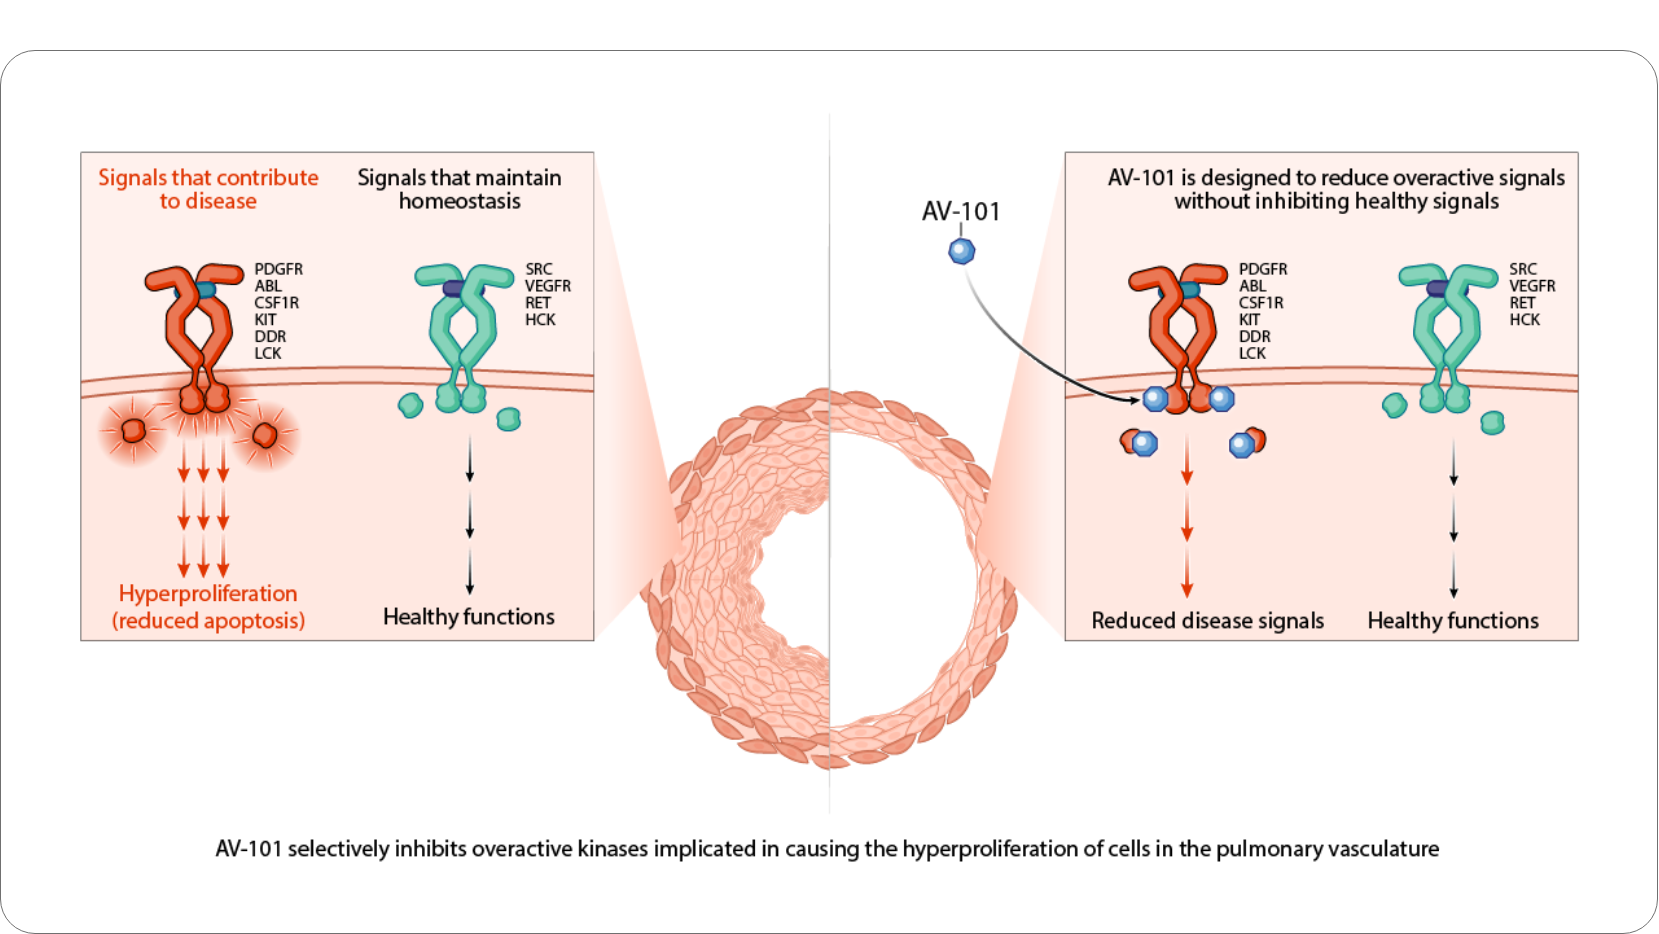 Cellular diagram - AV-101 selectively inhibits overactive kinases implicated in driving PAH